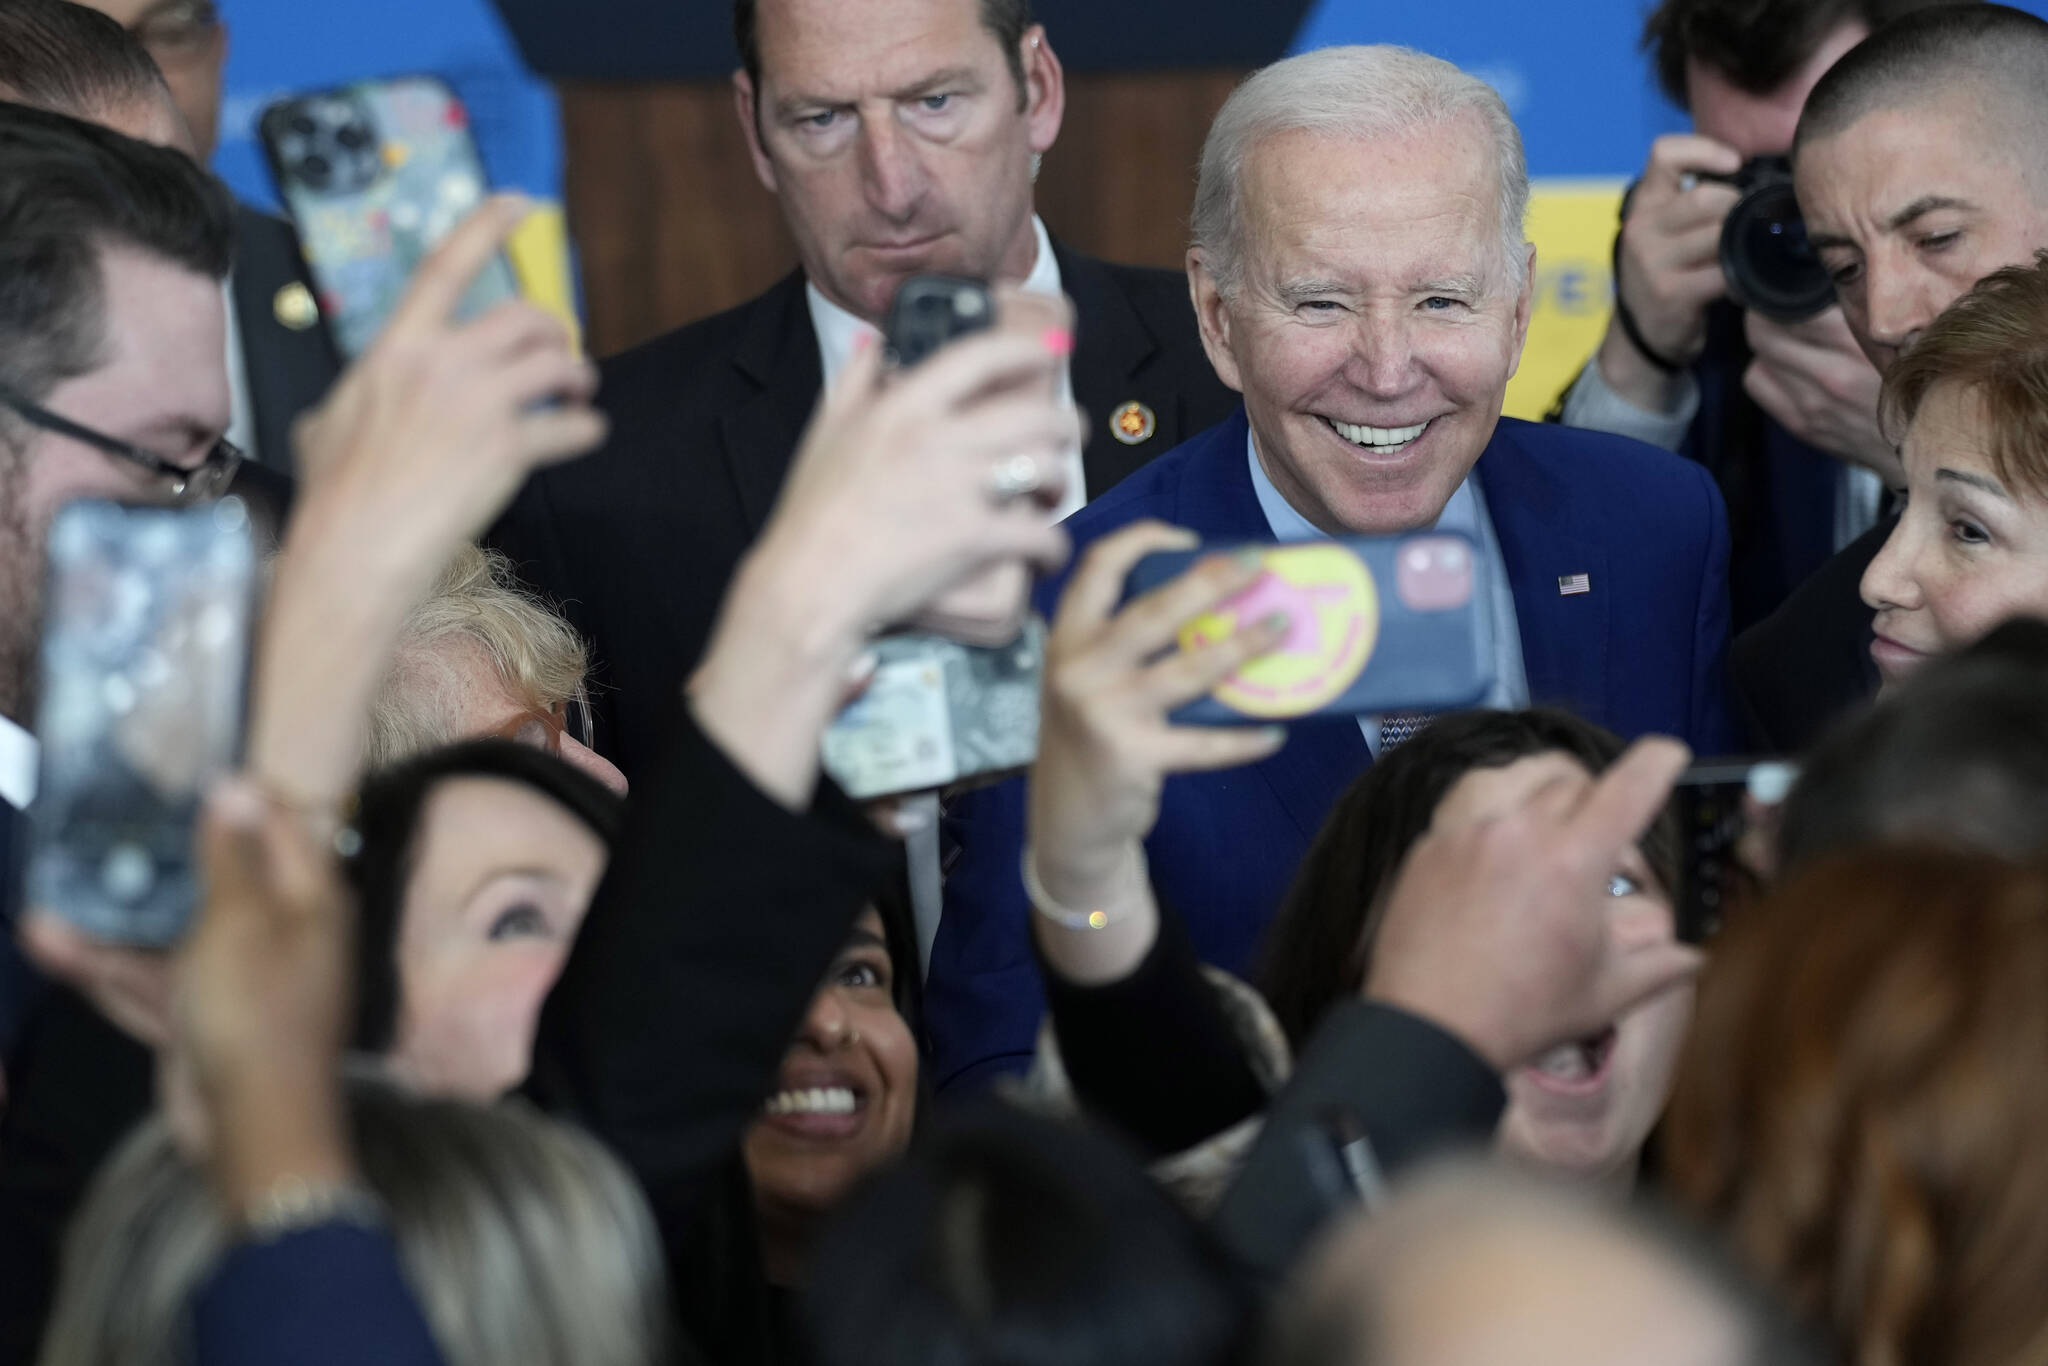 President Joe Biden greets people after speaking about health care and prescription drug costs at the University of Nevada, Las Vegas, Wednesday, March 15, 2023, in Las Vegas. (AP Photo / John Locher)